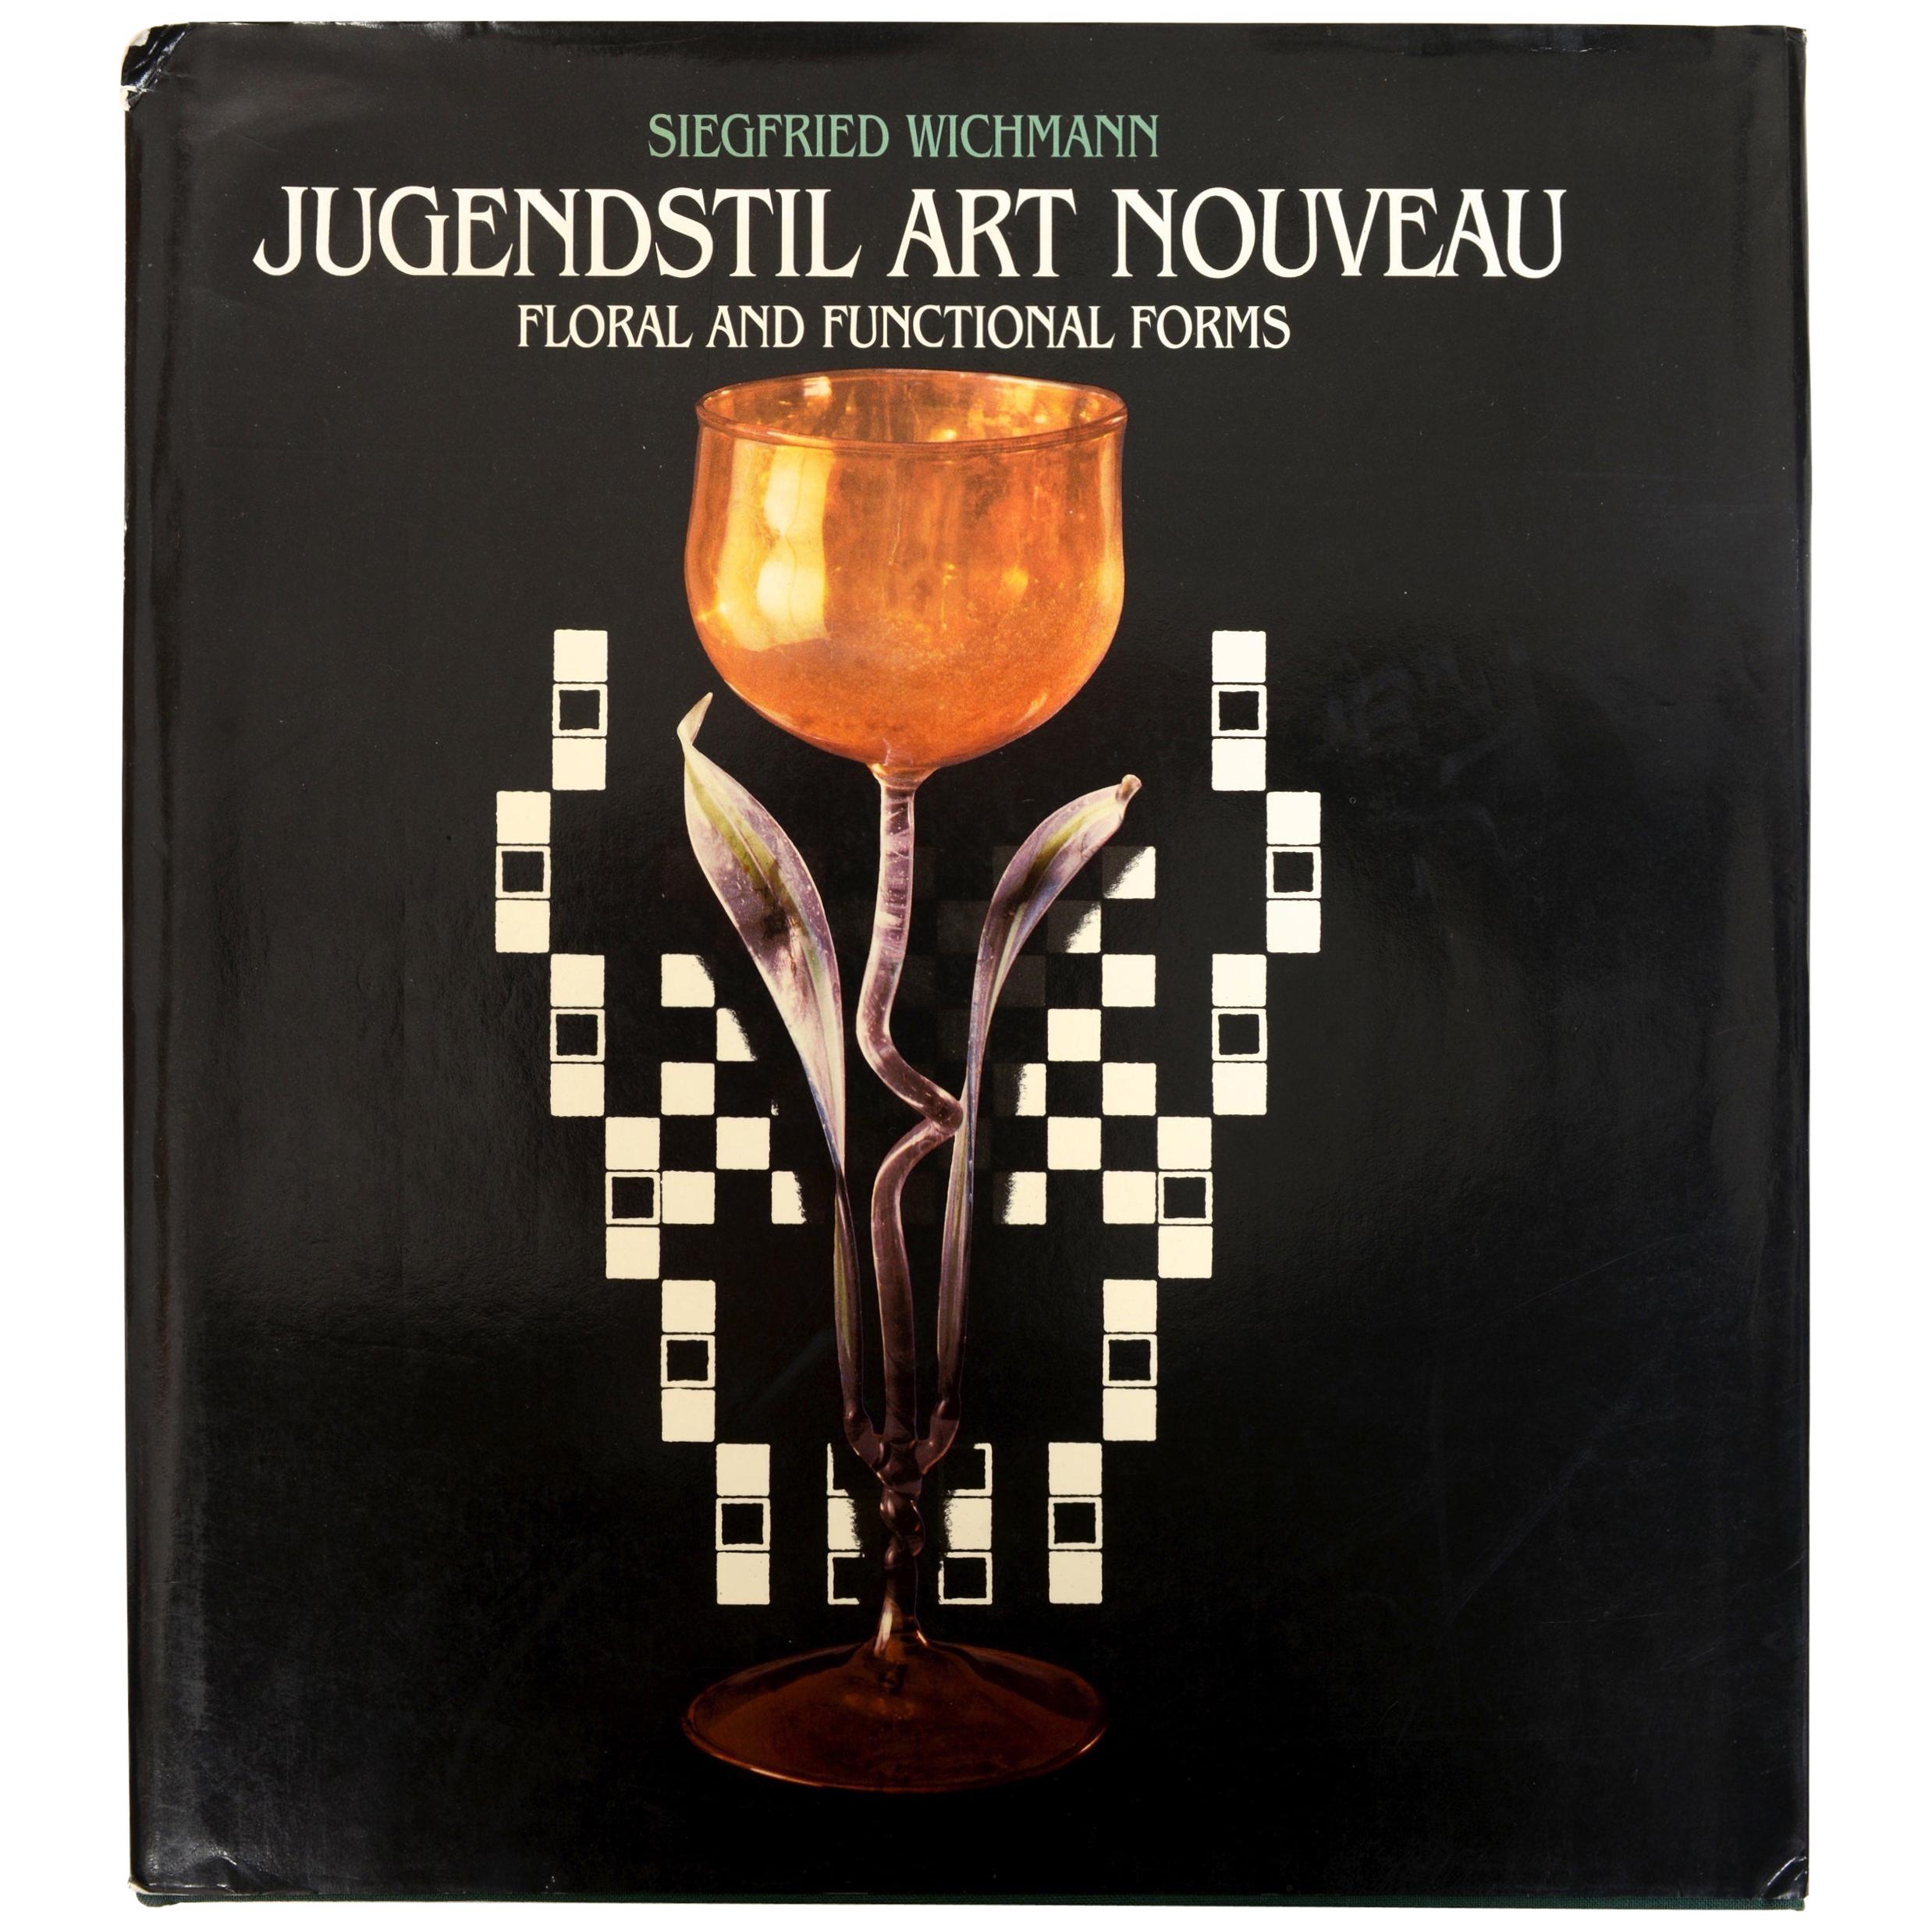 Jugendstil Art Nouveau: Floral and Functional Forms, by Siegfried Wichmann, 1st  For Sale